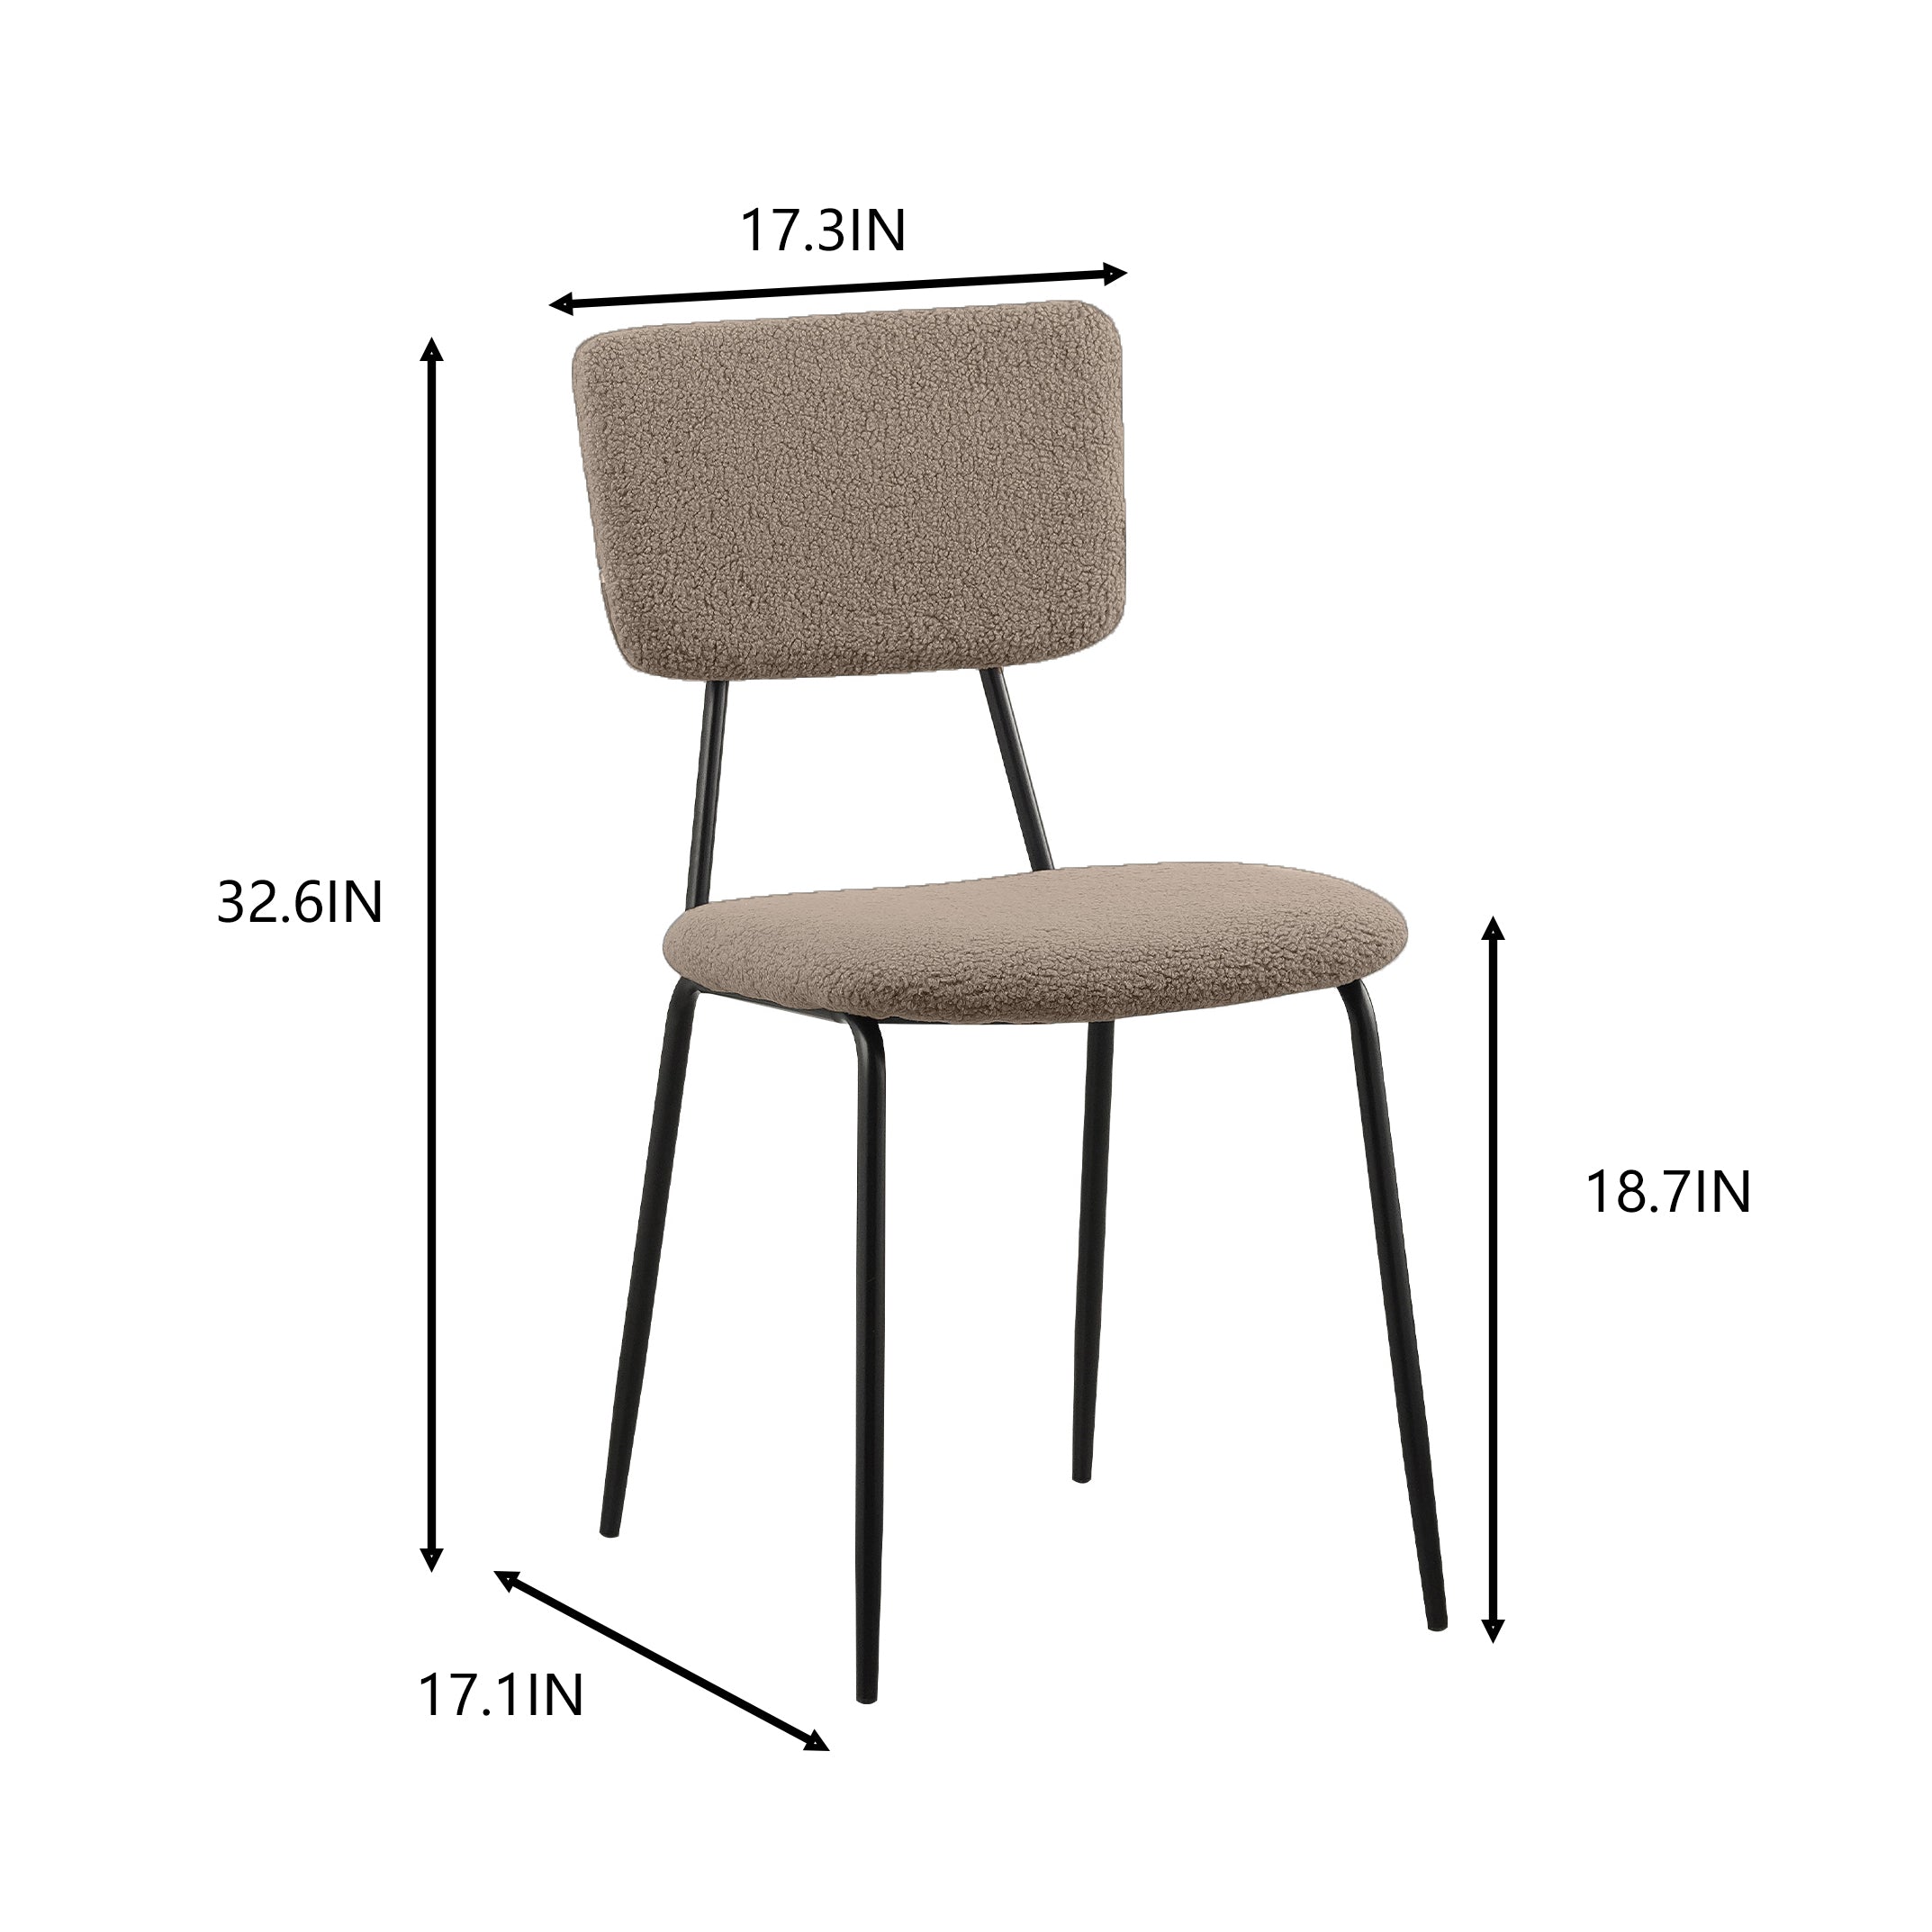 SogesPower Dining Chairs Set of 2, Modern Chairs with Faux Plush Upholstered Back and Chrome Legs, (2 Brown Chairs)